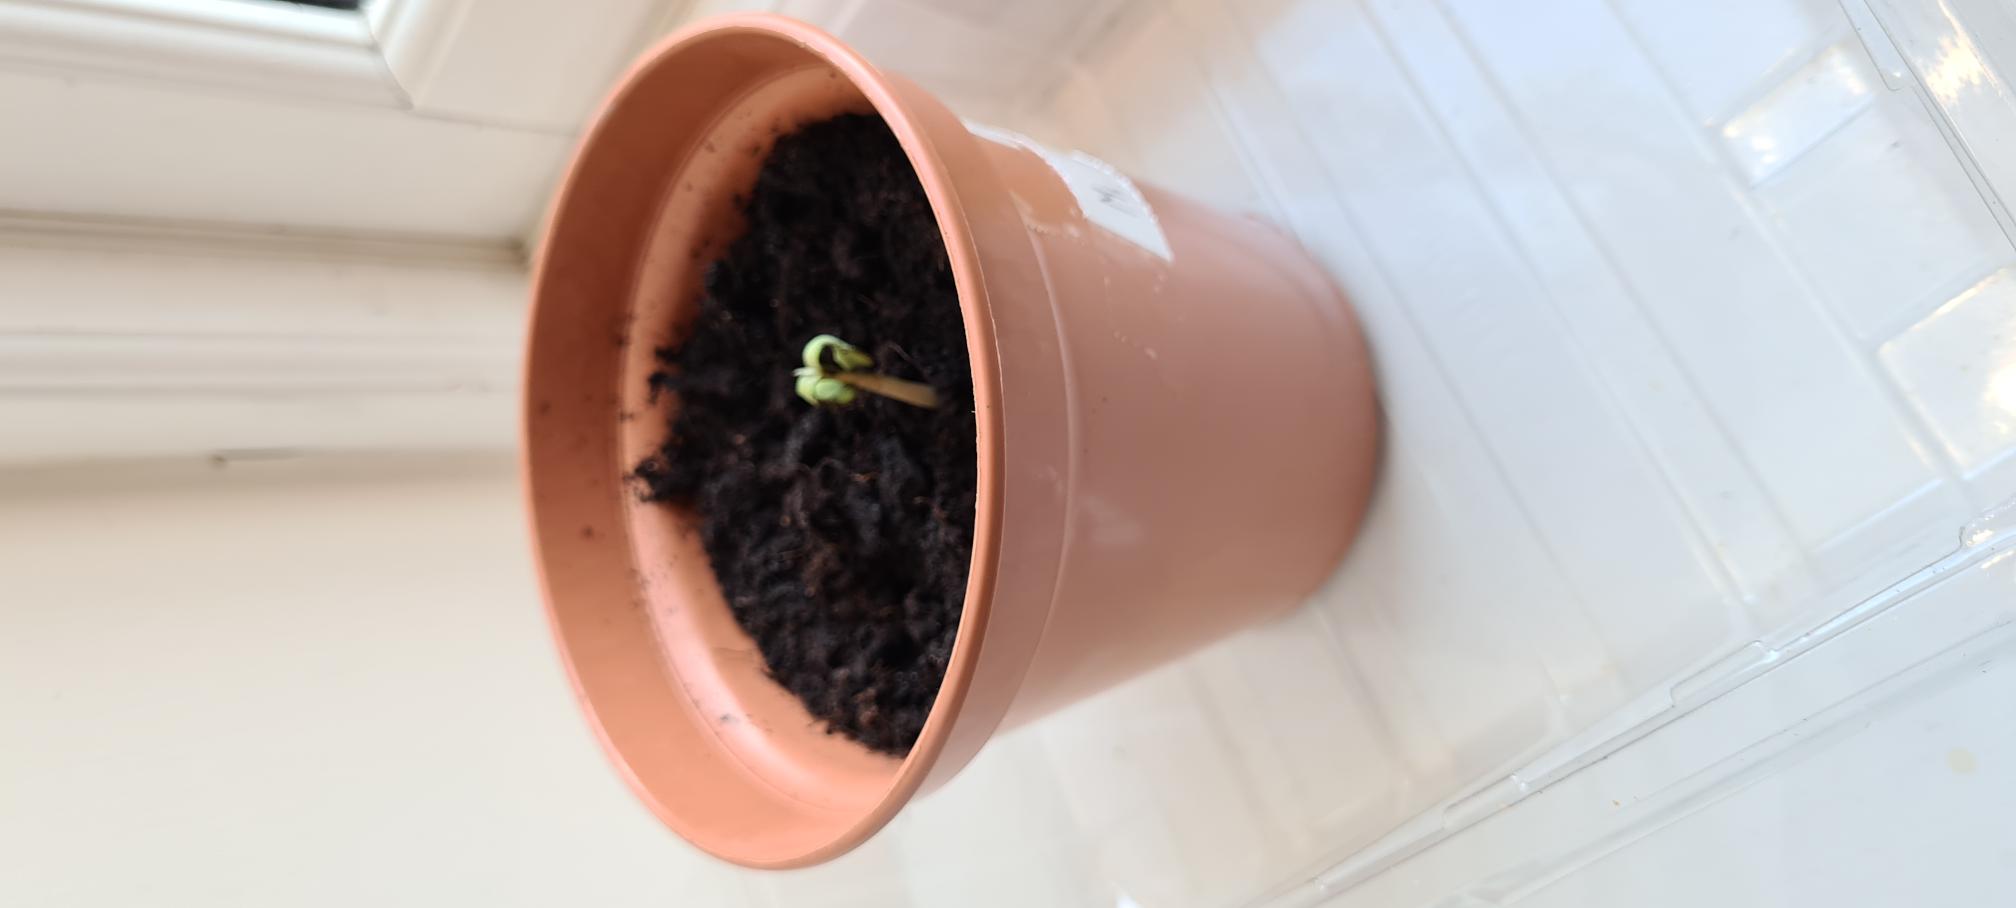 Saurabh S - there's another one which is really small compared to others and the leaves have started curling down. Could you please advise on how to get it strong again